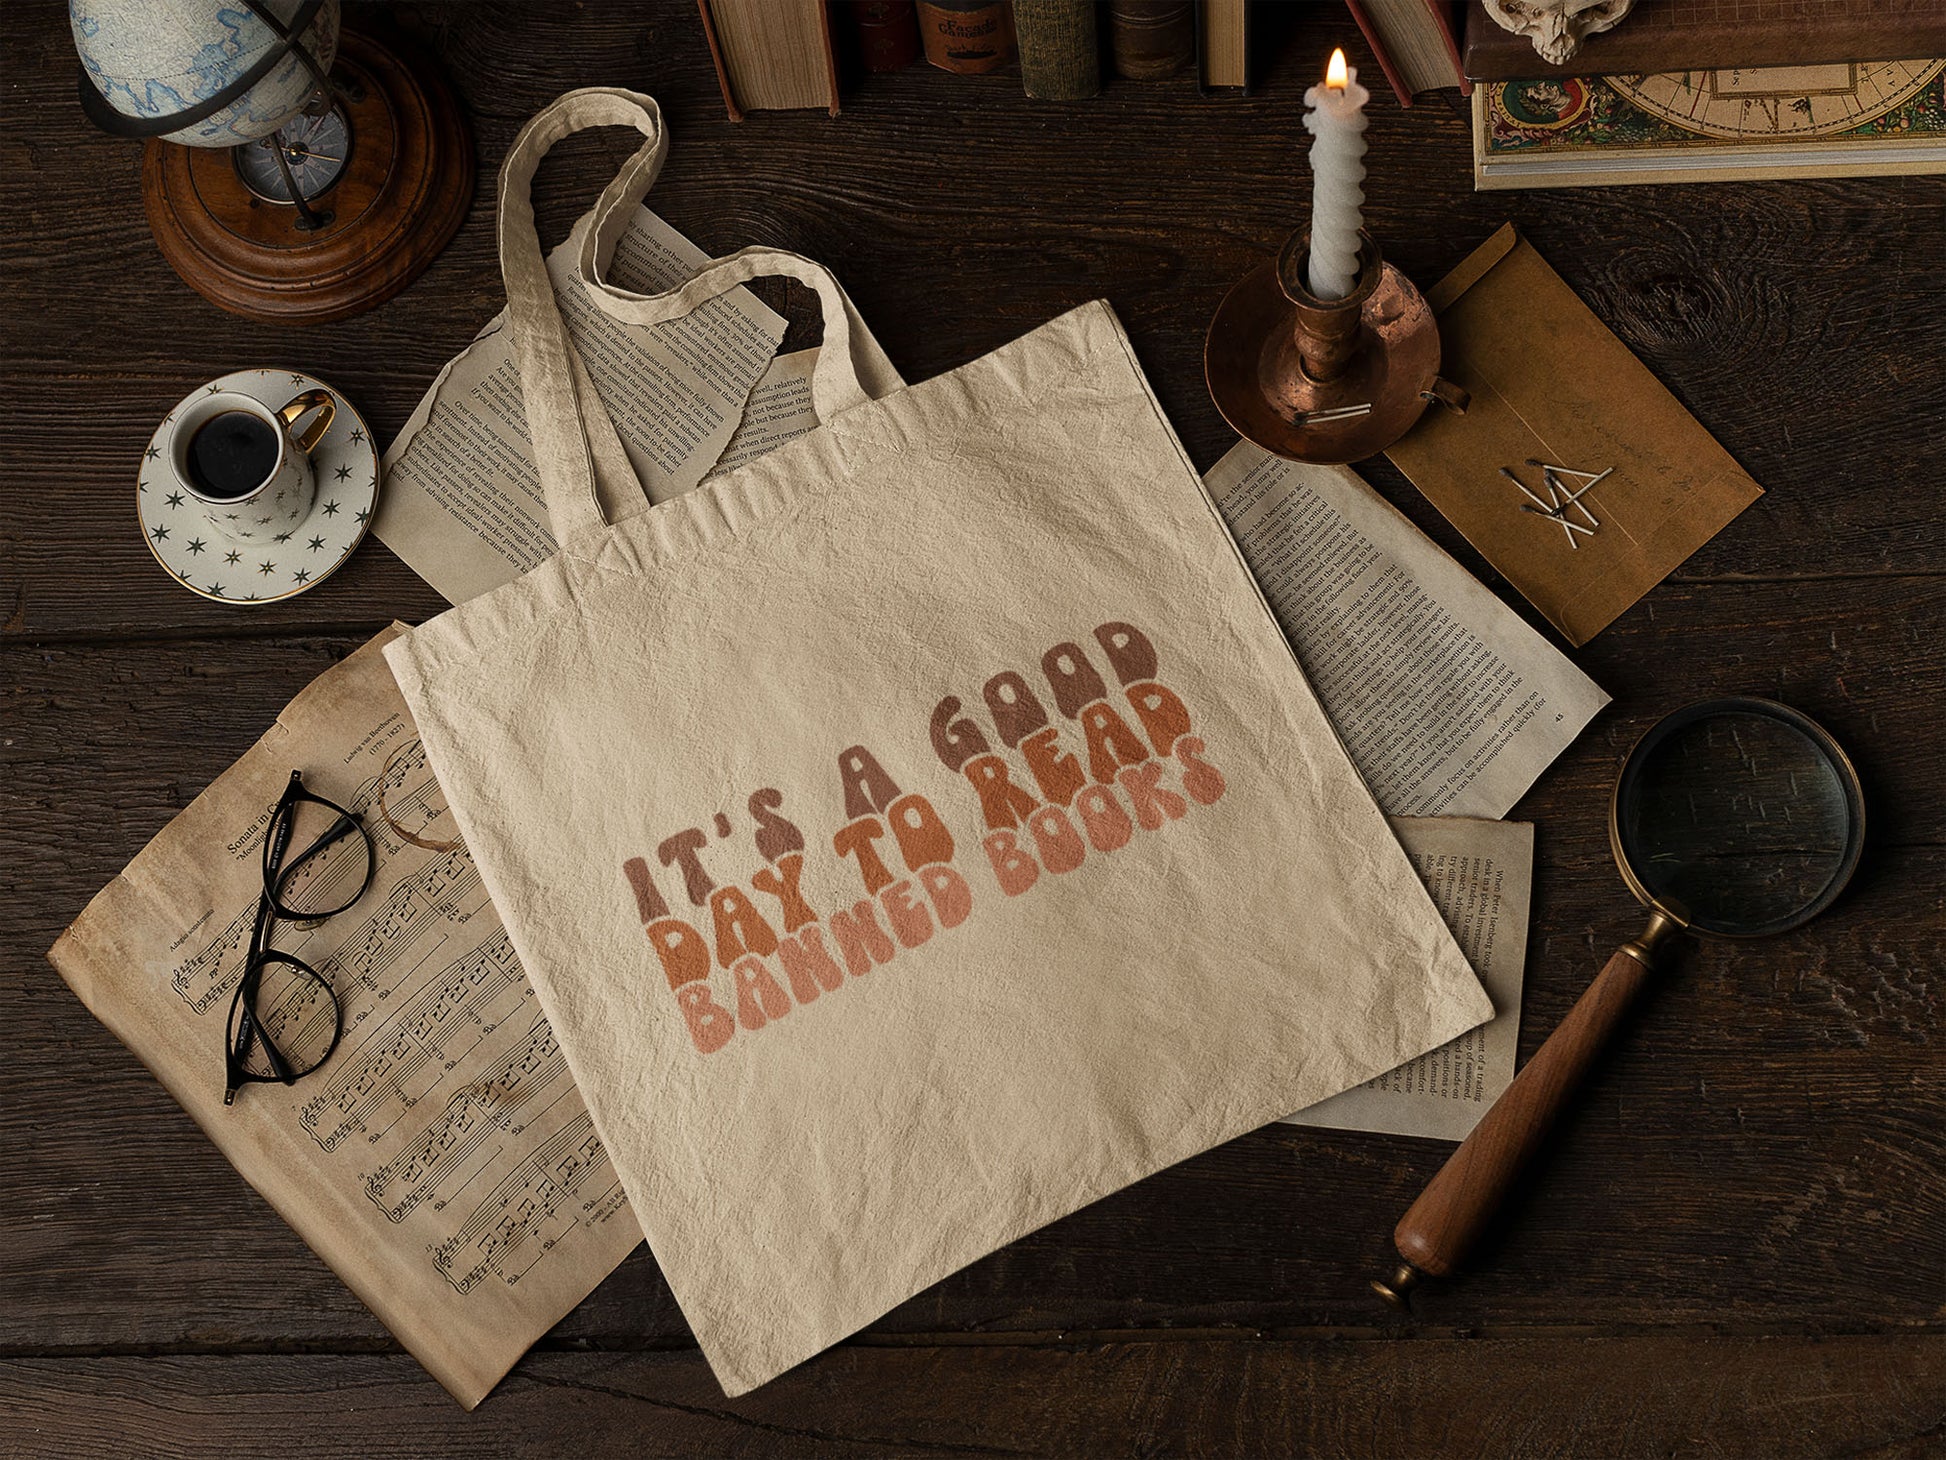 I'm With the Banned Canvas Tote Bag Librarian and Reading Book Bag Gift for  Reader Bookish Merch 